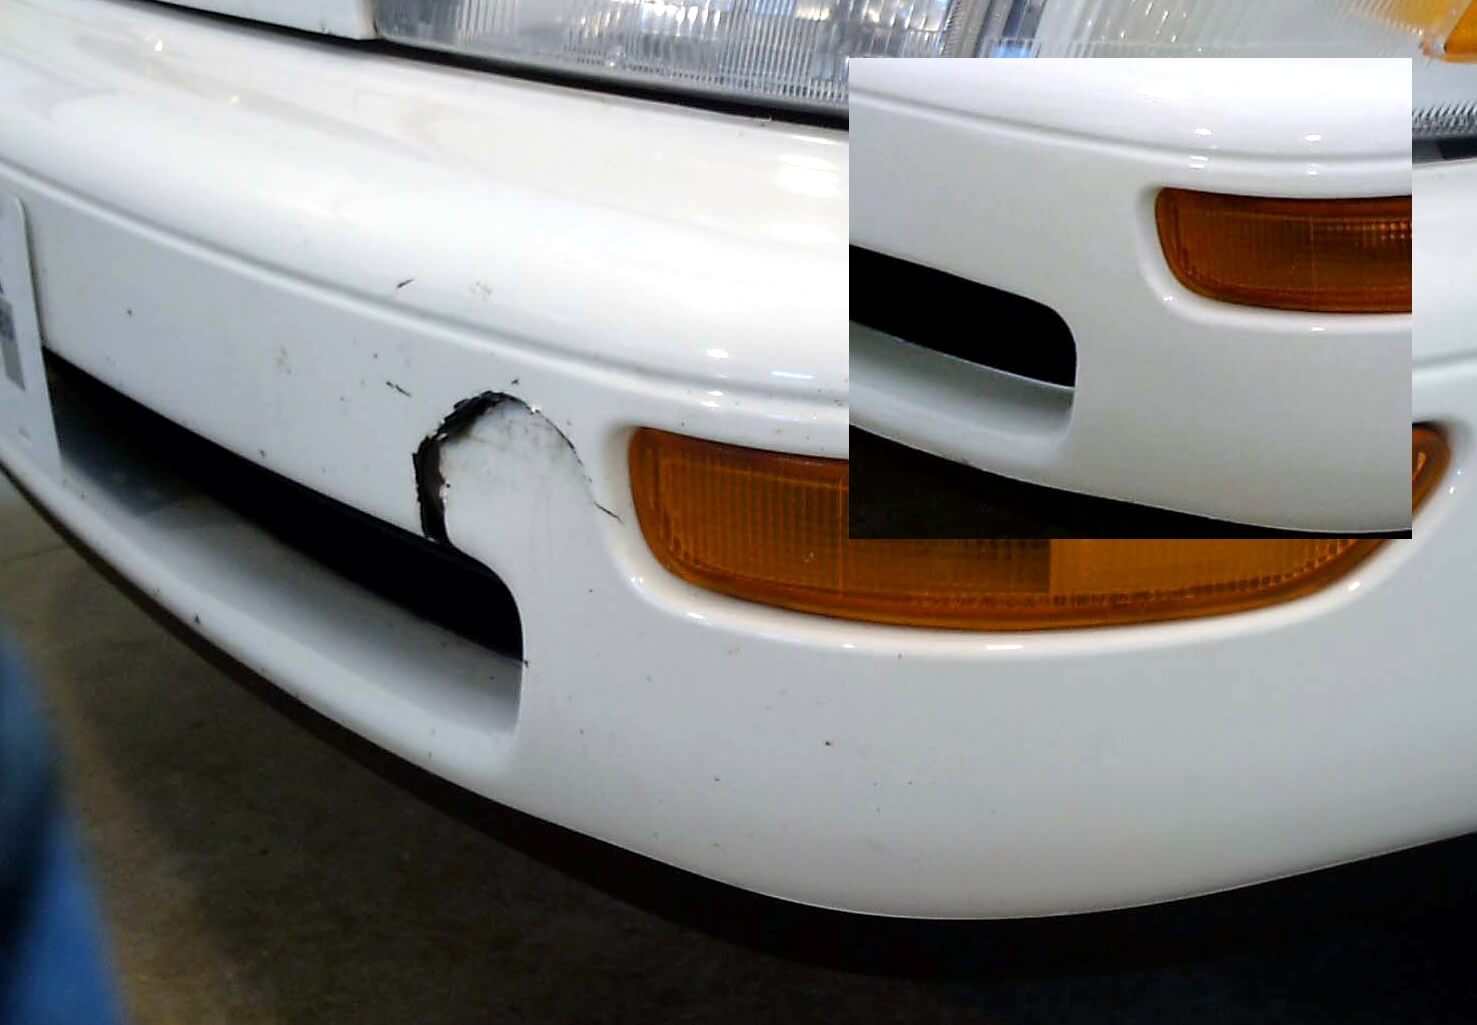 How Much Does it Cost to Repair or Replace a Bumper?